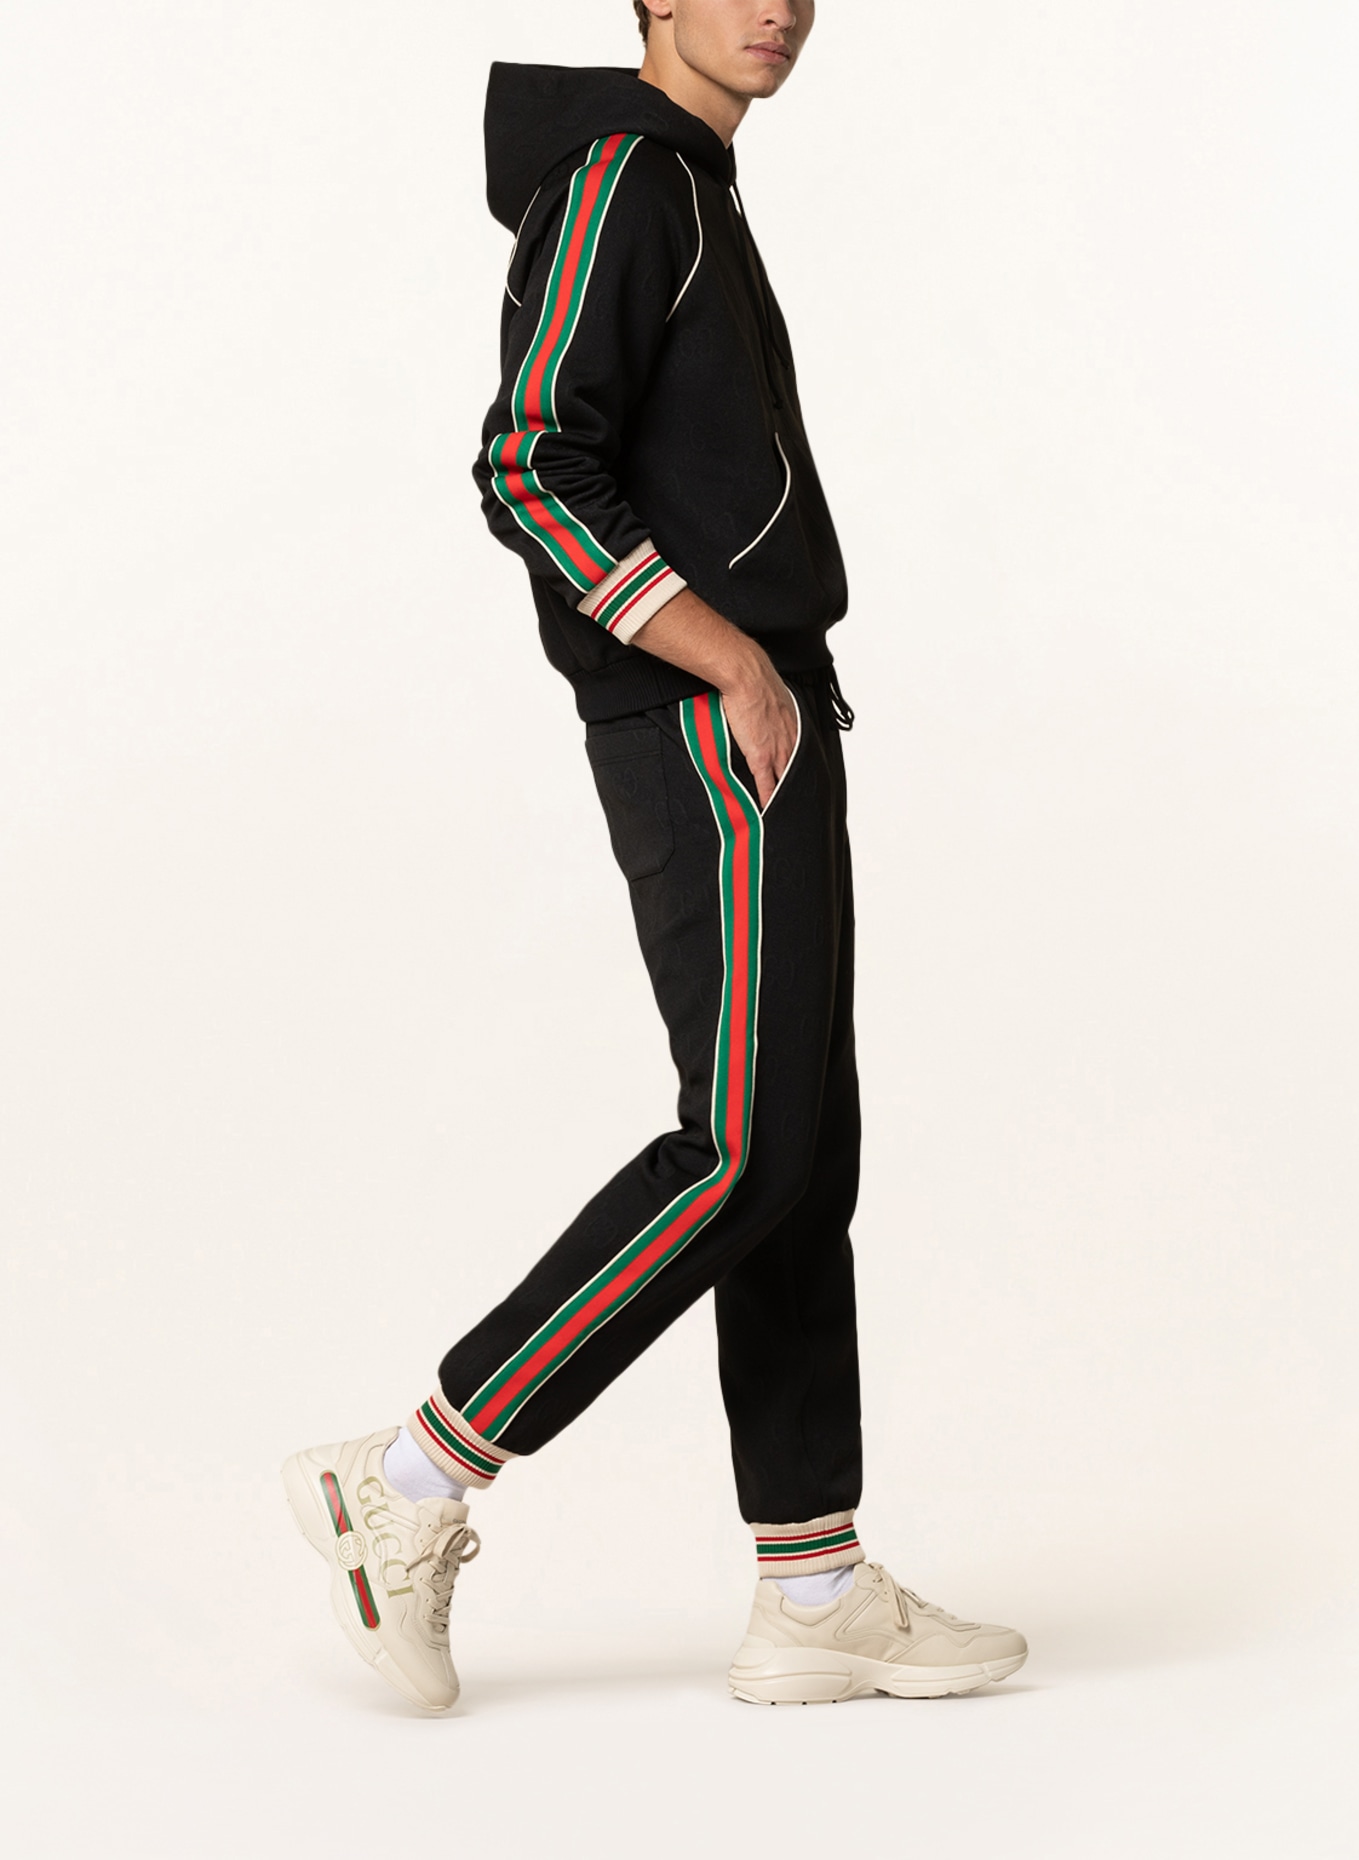 GUCCI Jacquard trousers GG in jogger style with tuxedo stripes, Color: BLACK/ GREEN/ RED (Image 4)